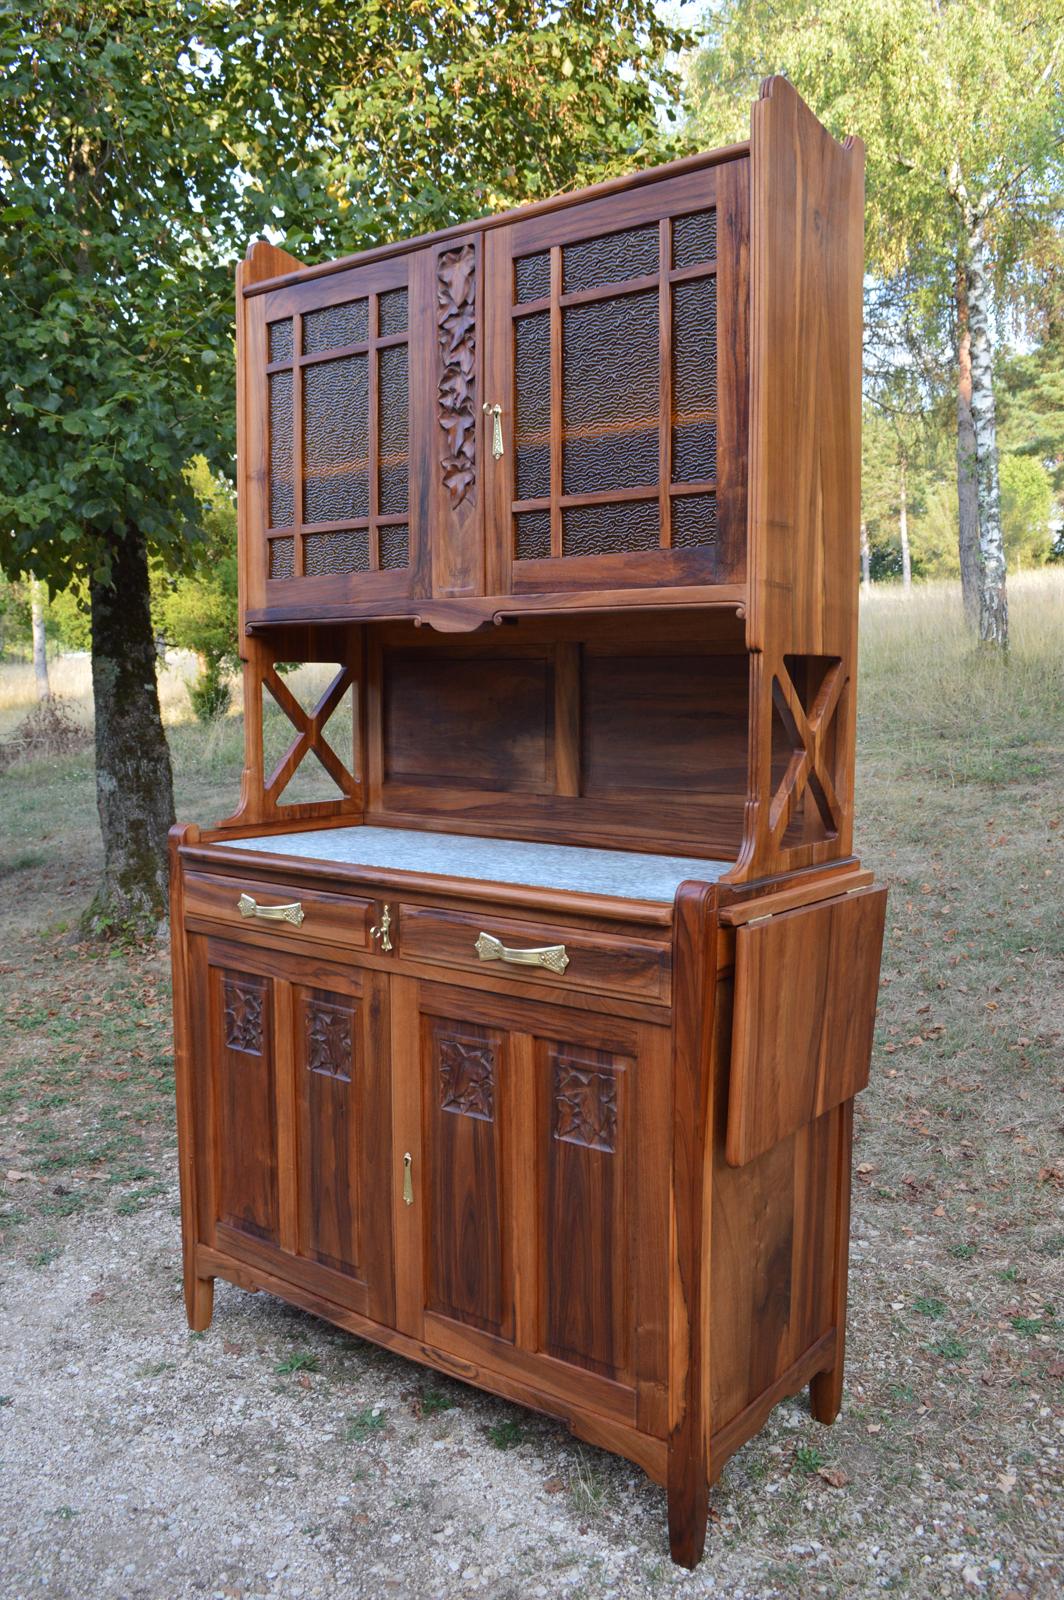 French Art Nouveau Sideboard by La Ruche in Carved Cherry Wood, France, 1911